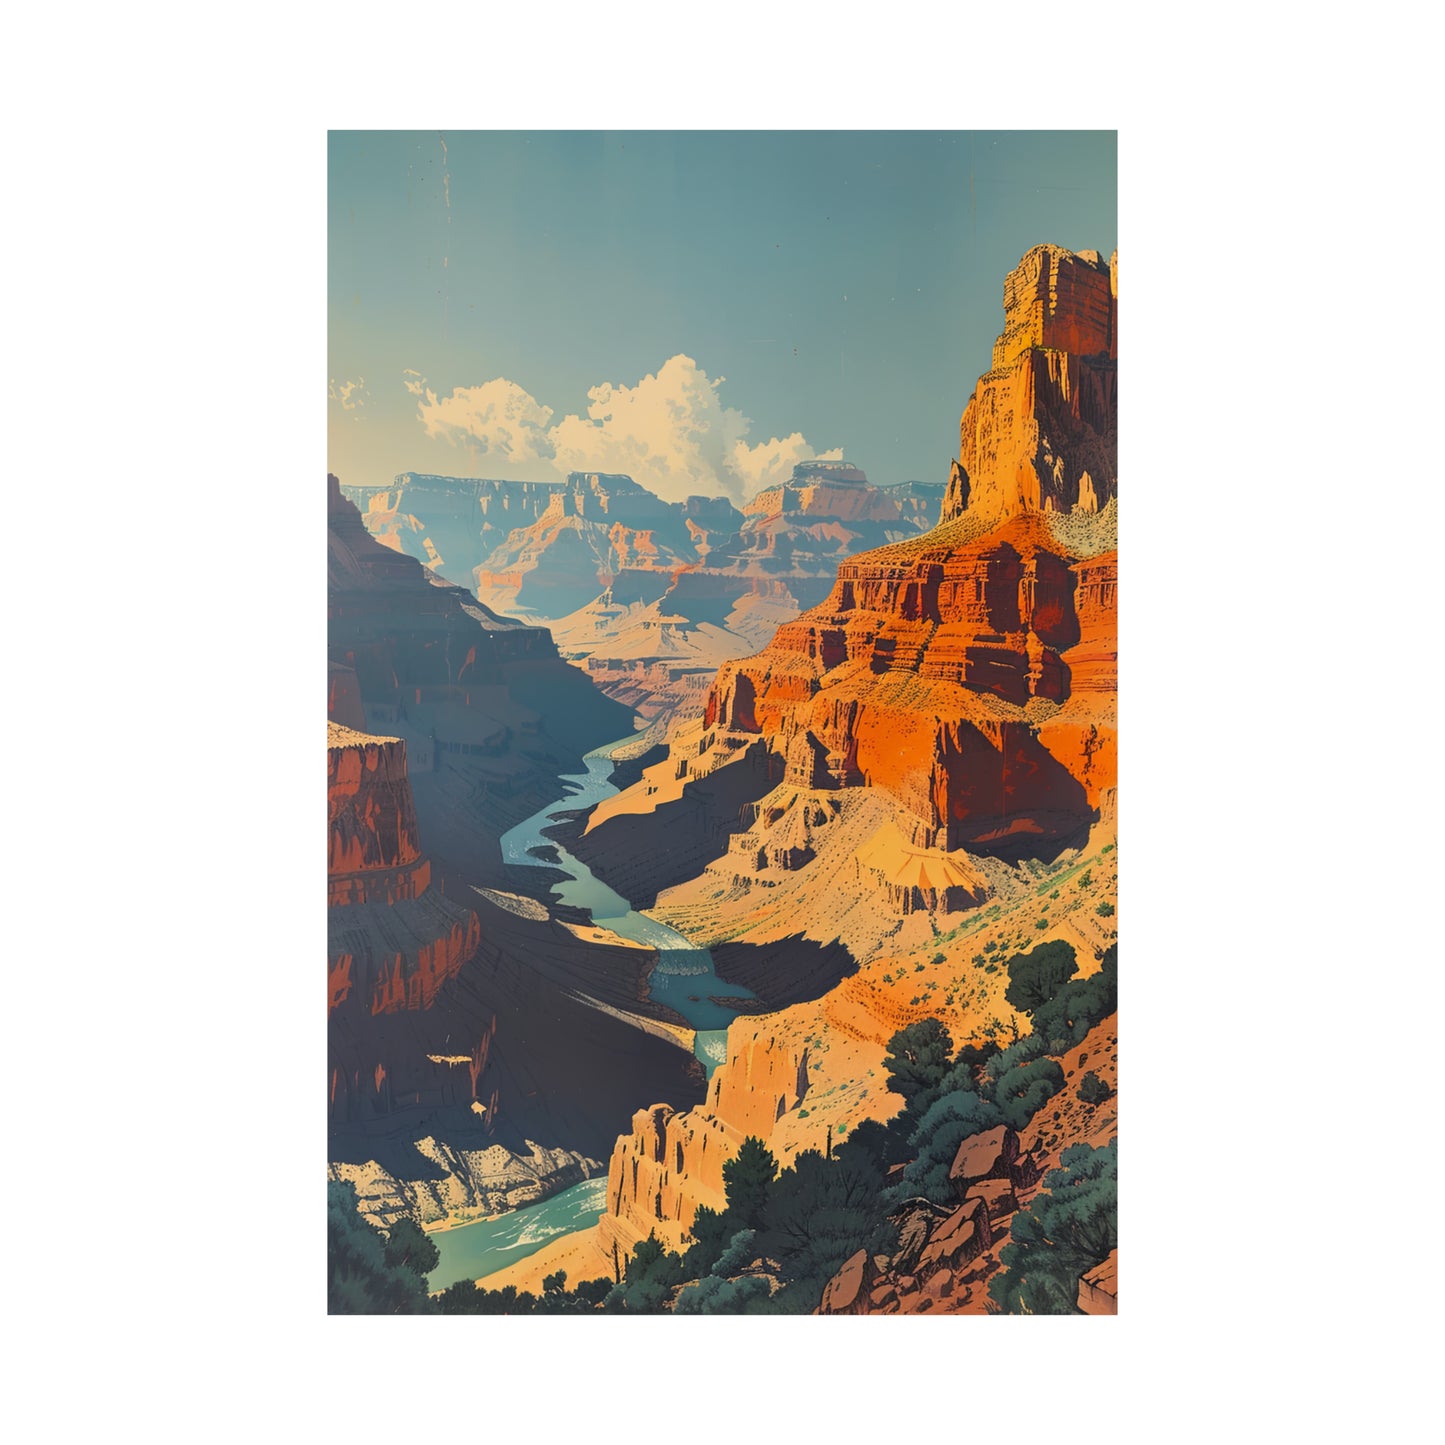 Vintage Poster of the Grand Canyon